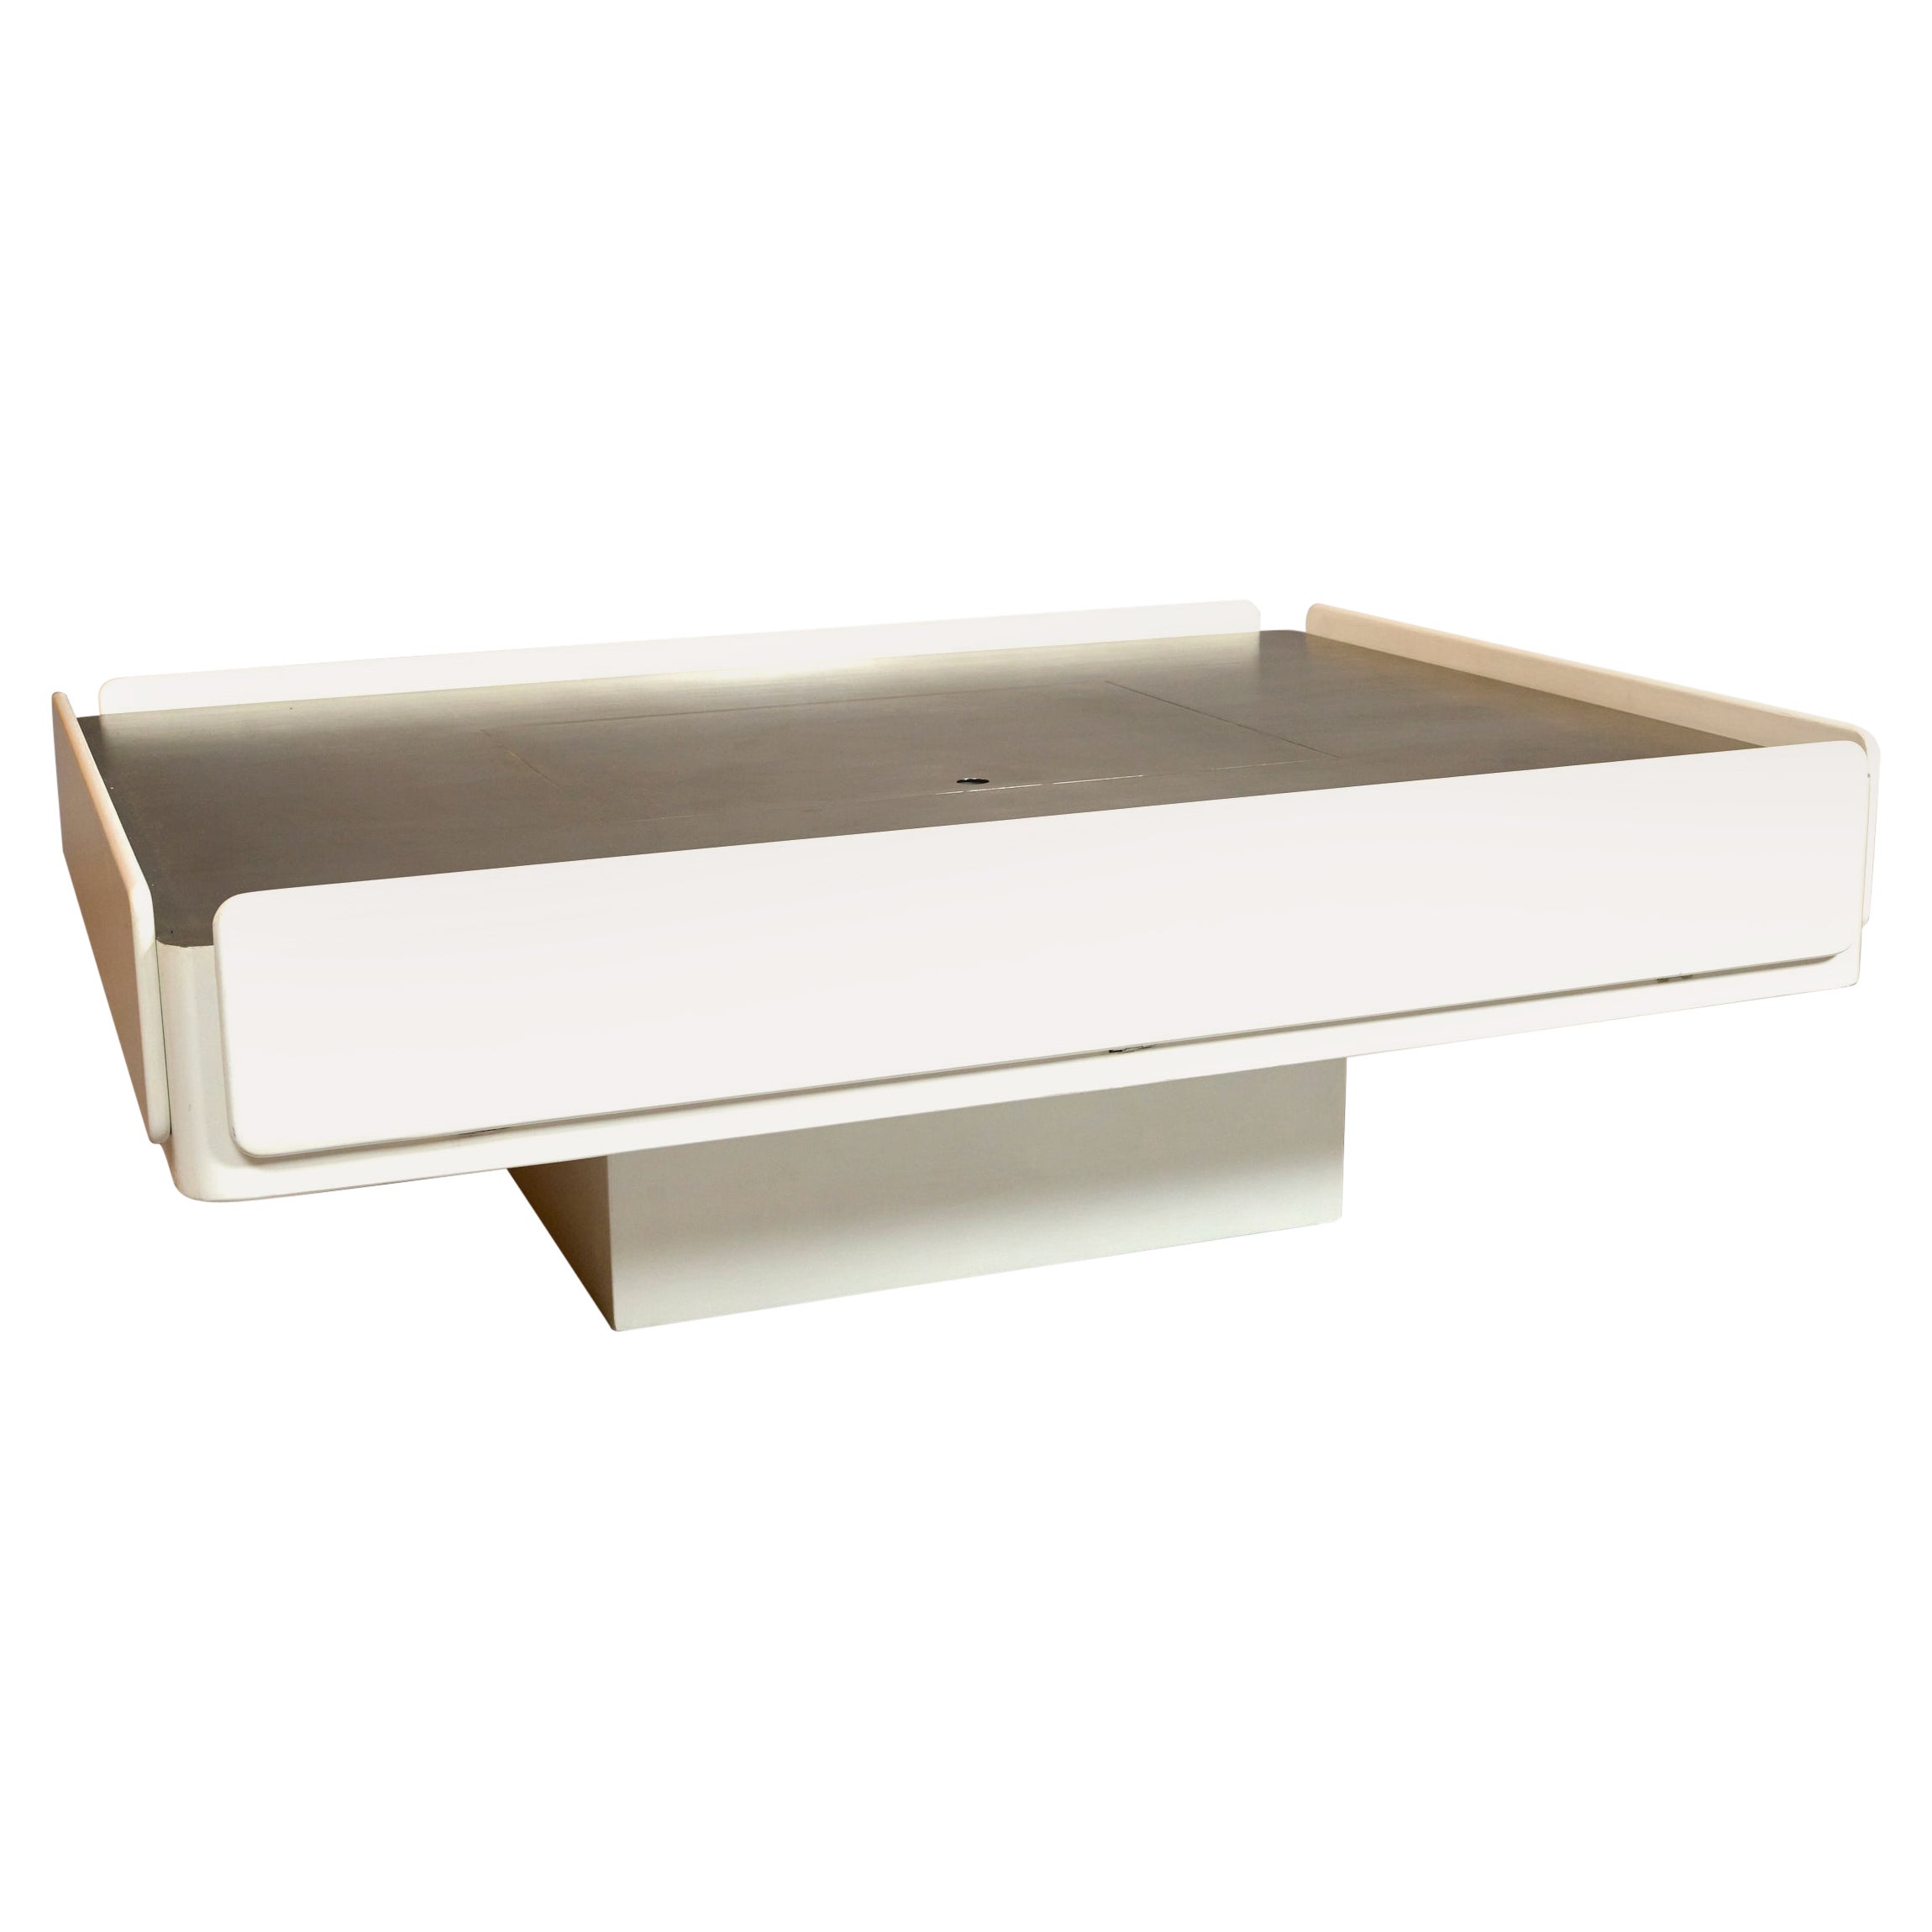 'Caori' Coffee Table by Vico Magistreti for Gavina with Concealed Storage